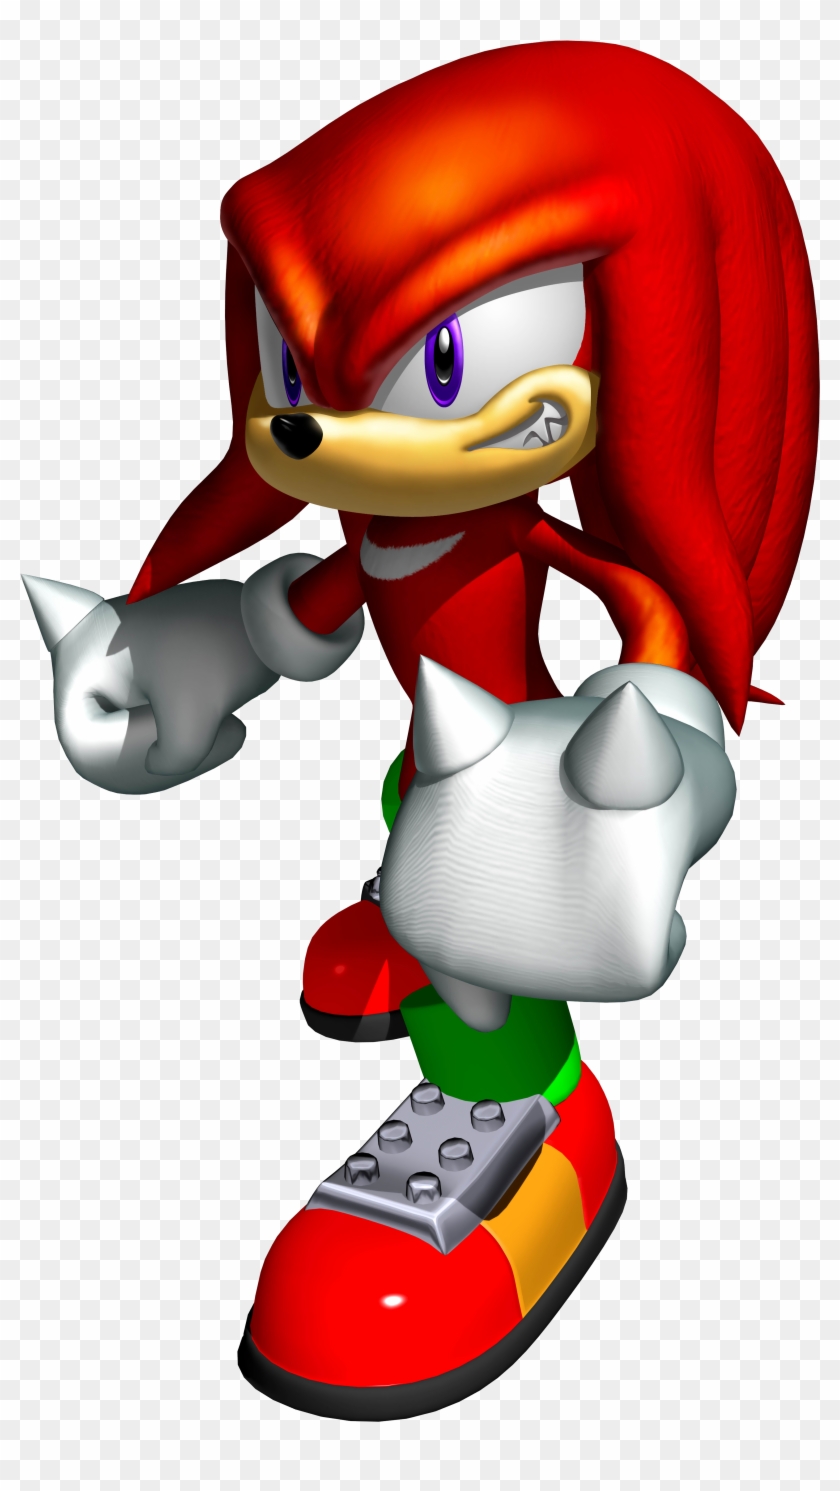 Knuckles Heroes 32 - Sonic The Hedgehog Clipart #2208828